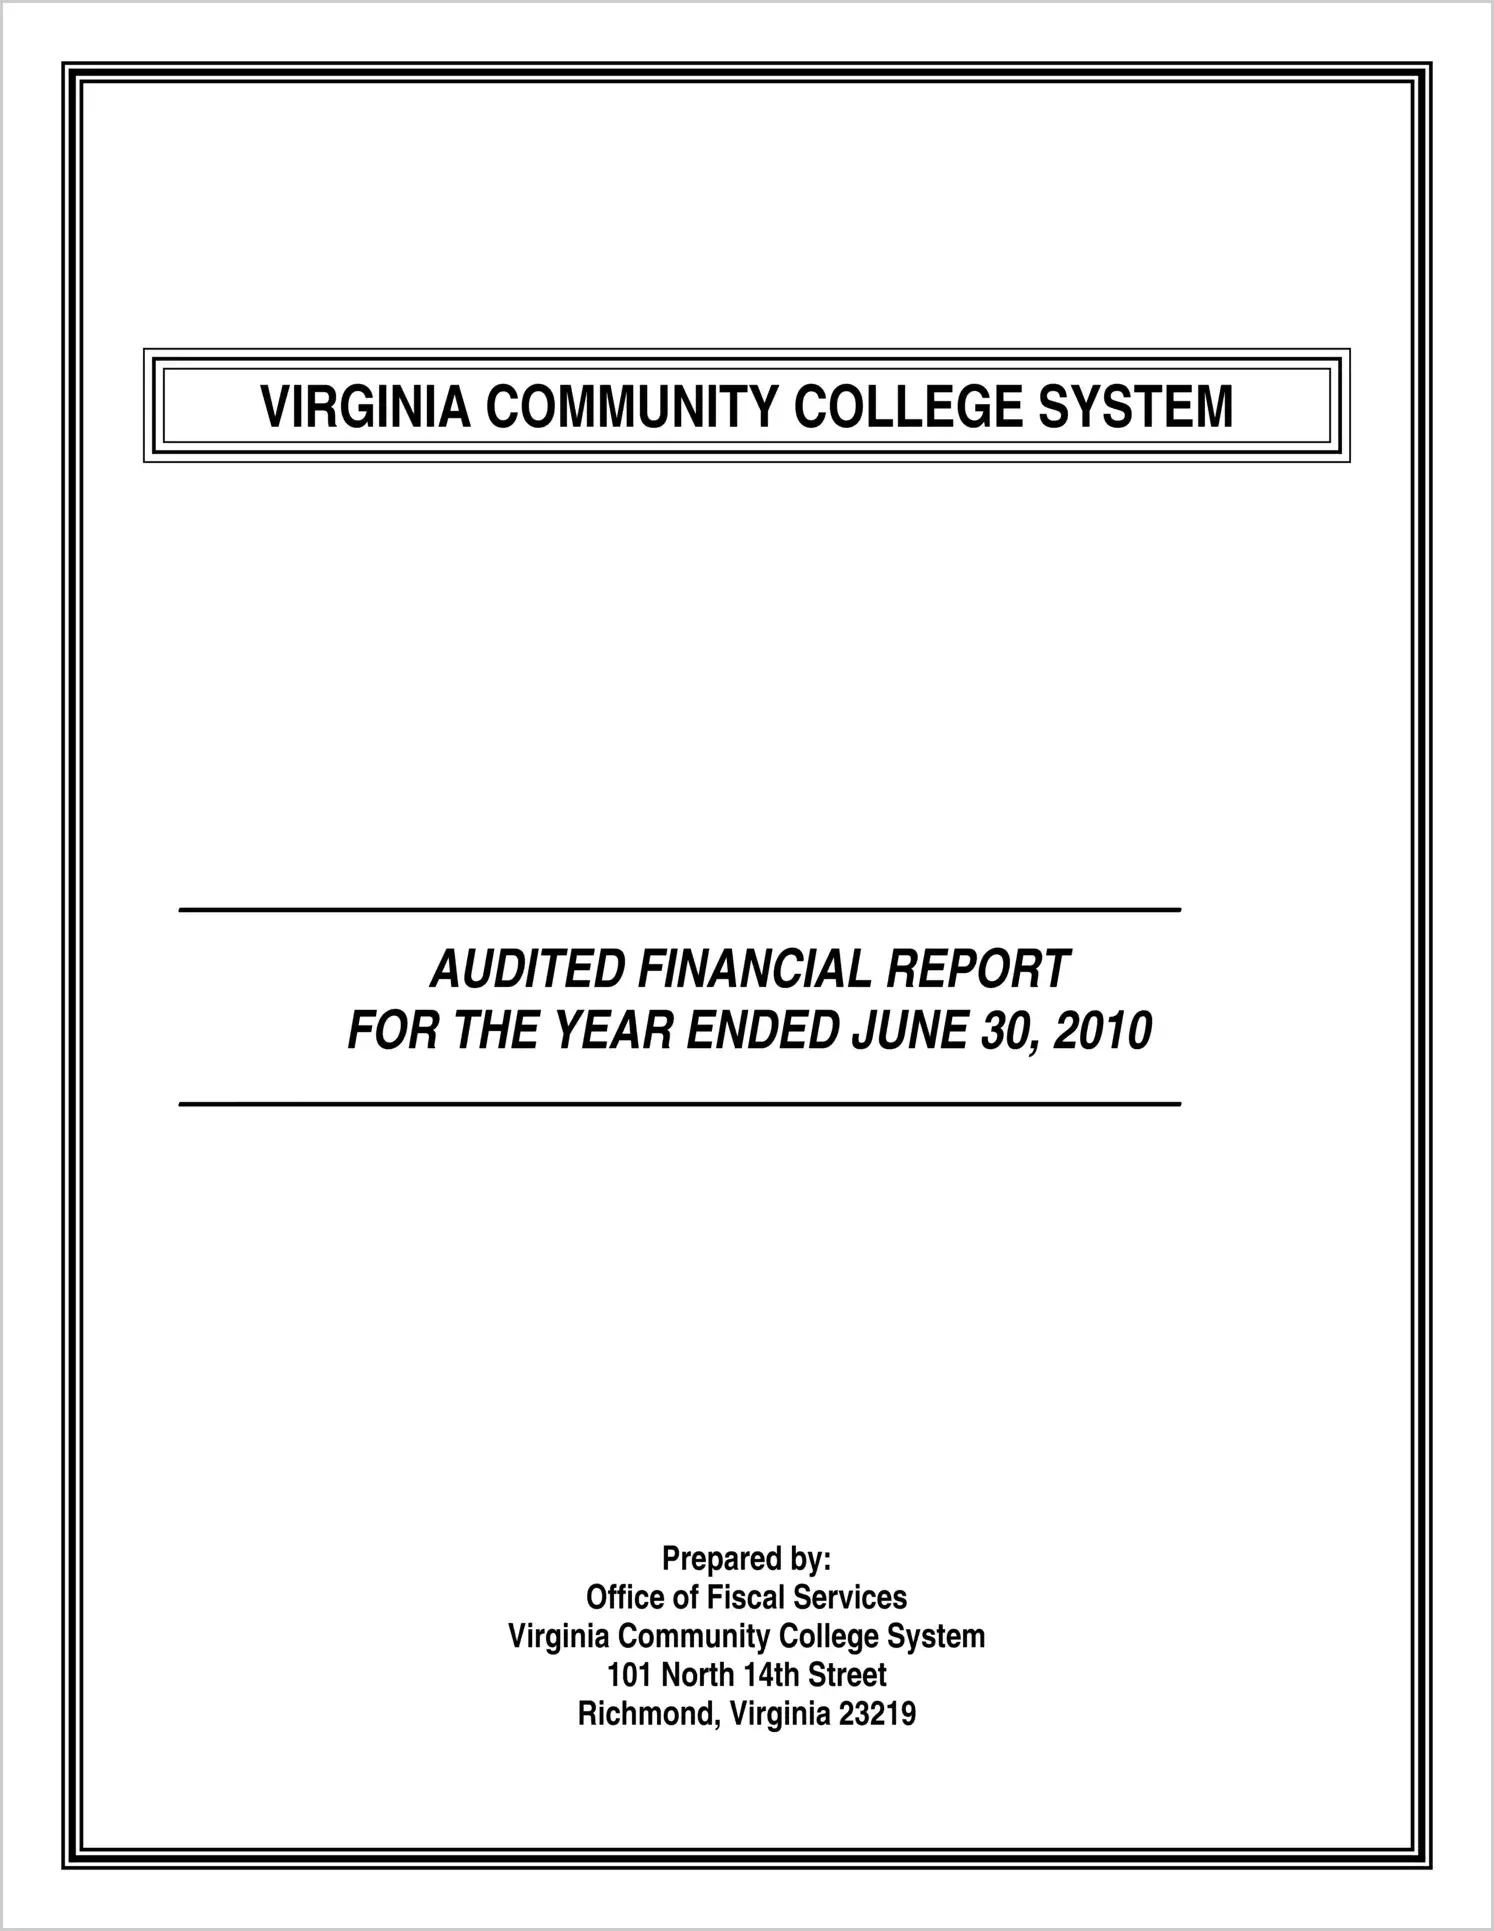 Virginia Community College System Financial Statement for the year ended June 30, 2010